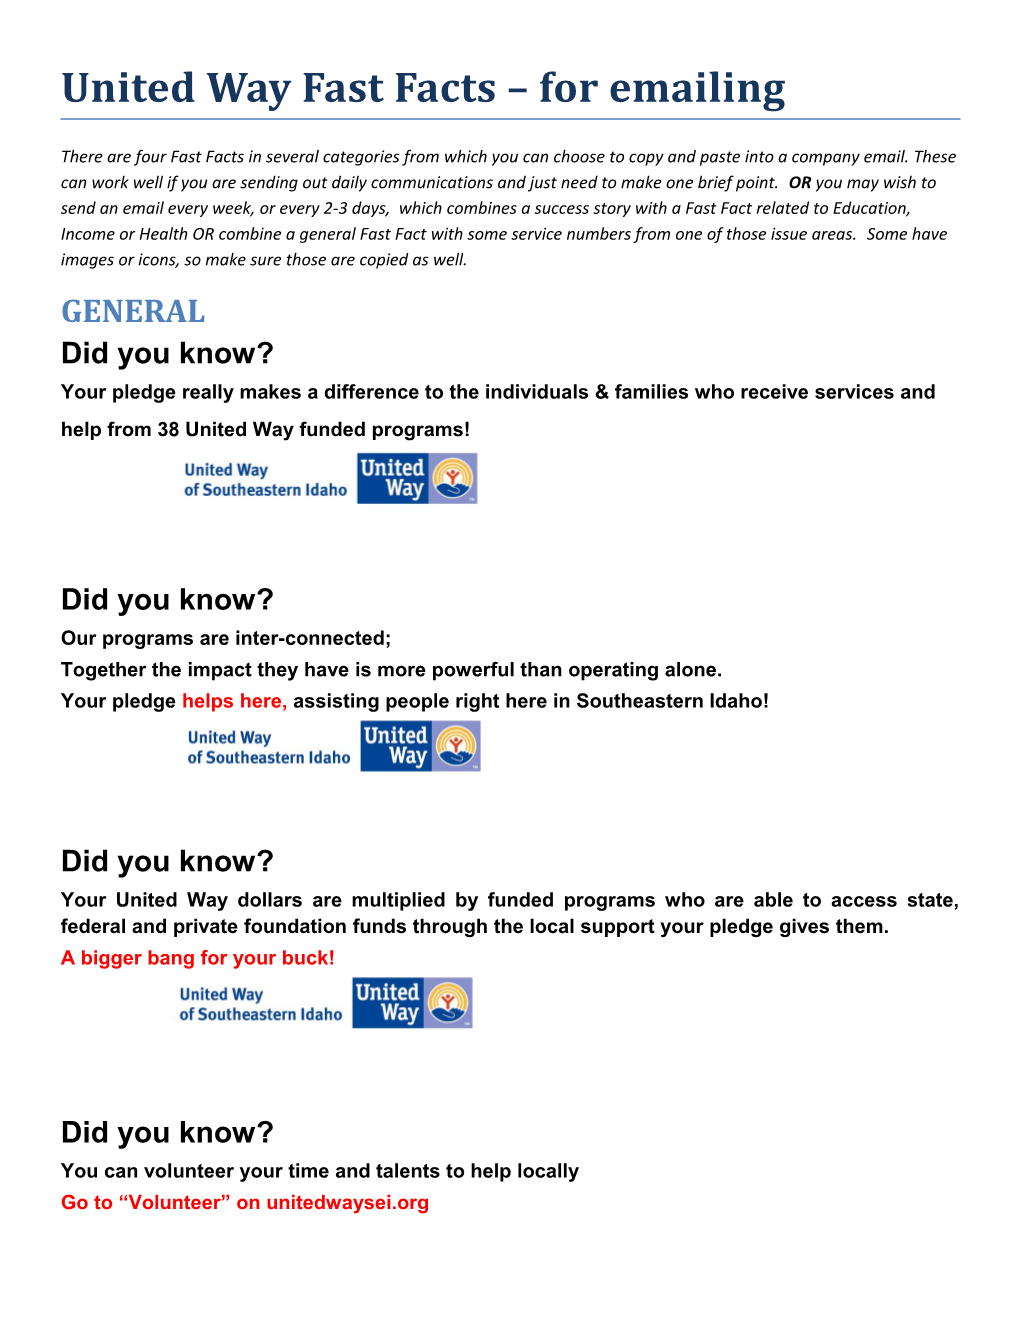 United Way Fast Facts for Emailing